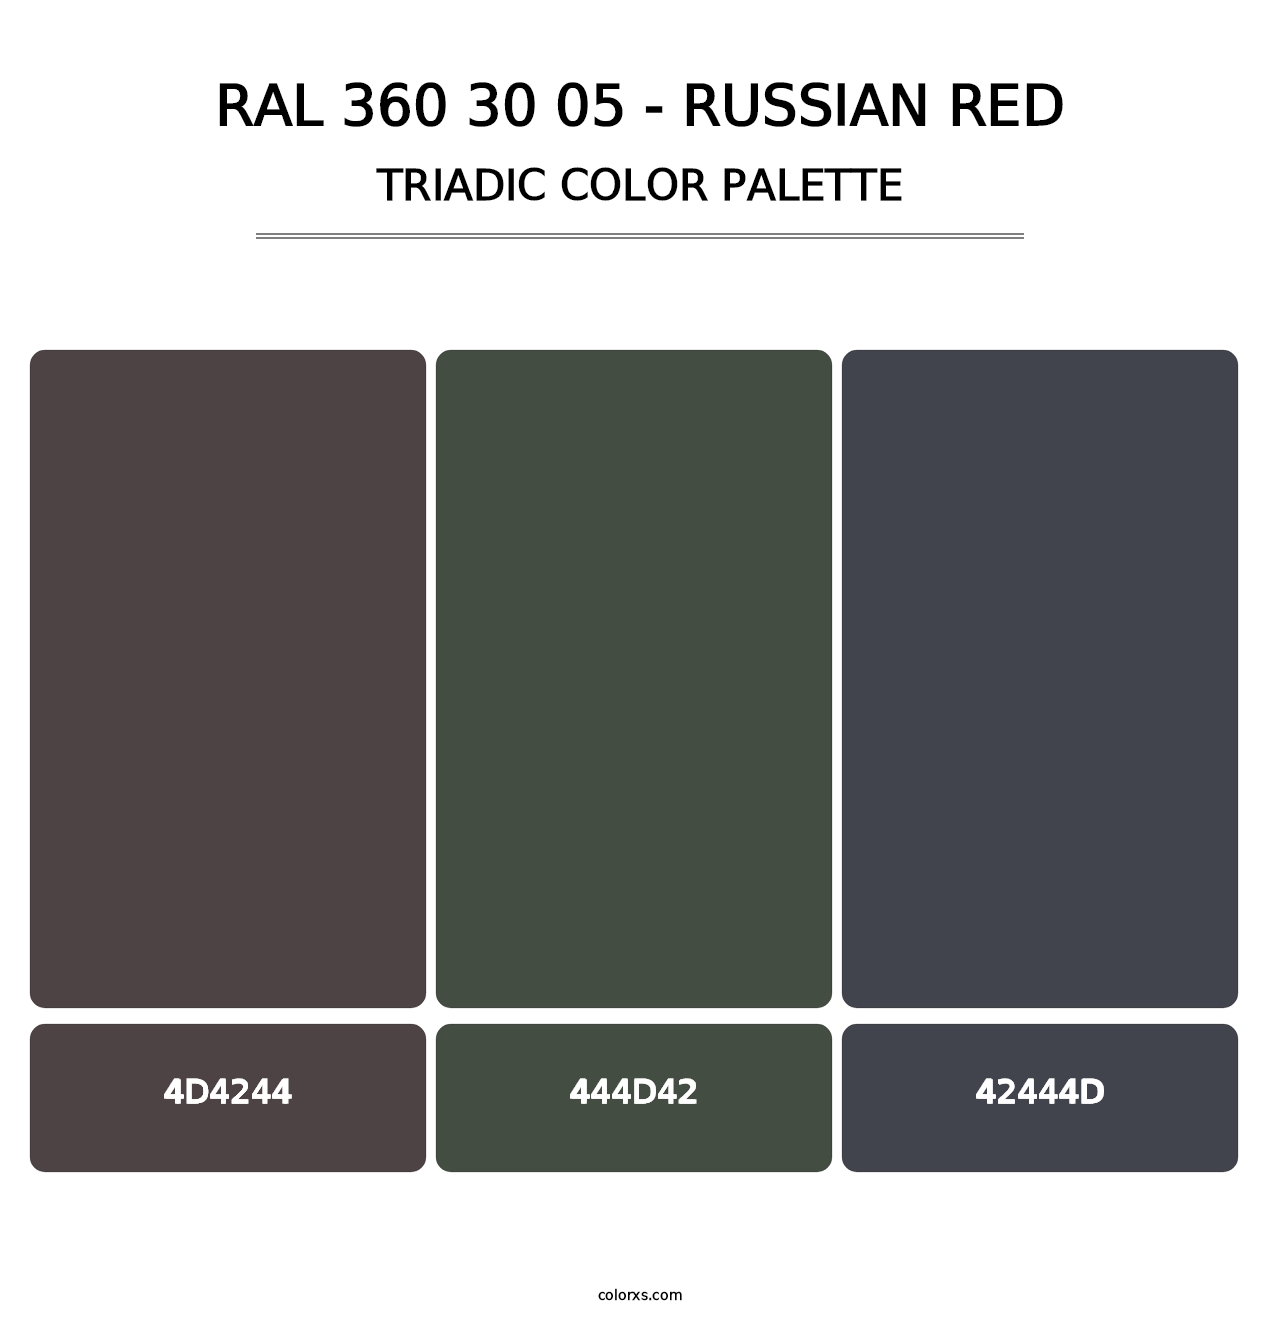 RAL 360 30 05 - Russian Red - Triadic Color Palette